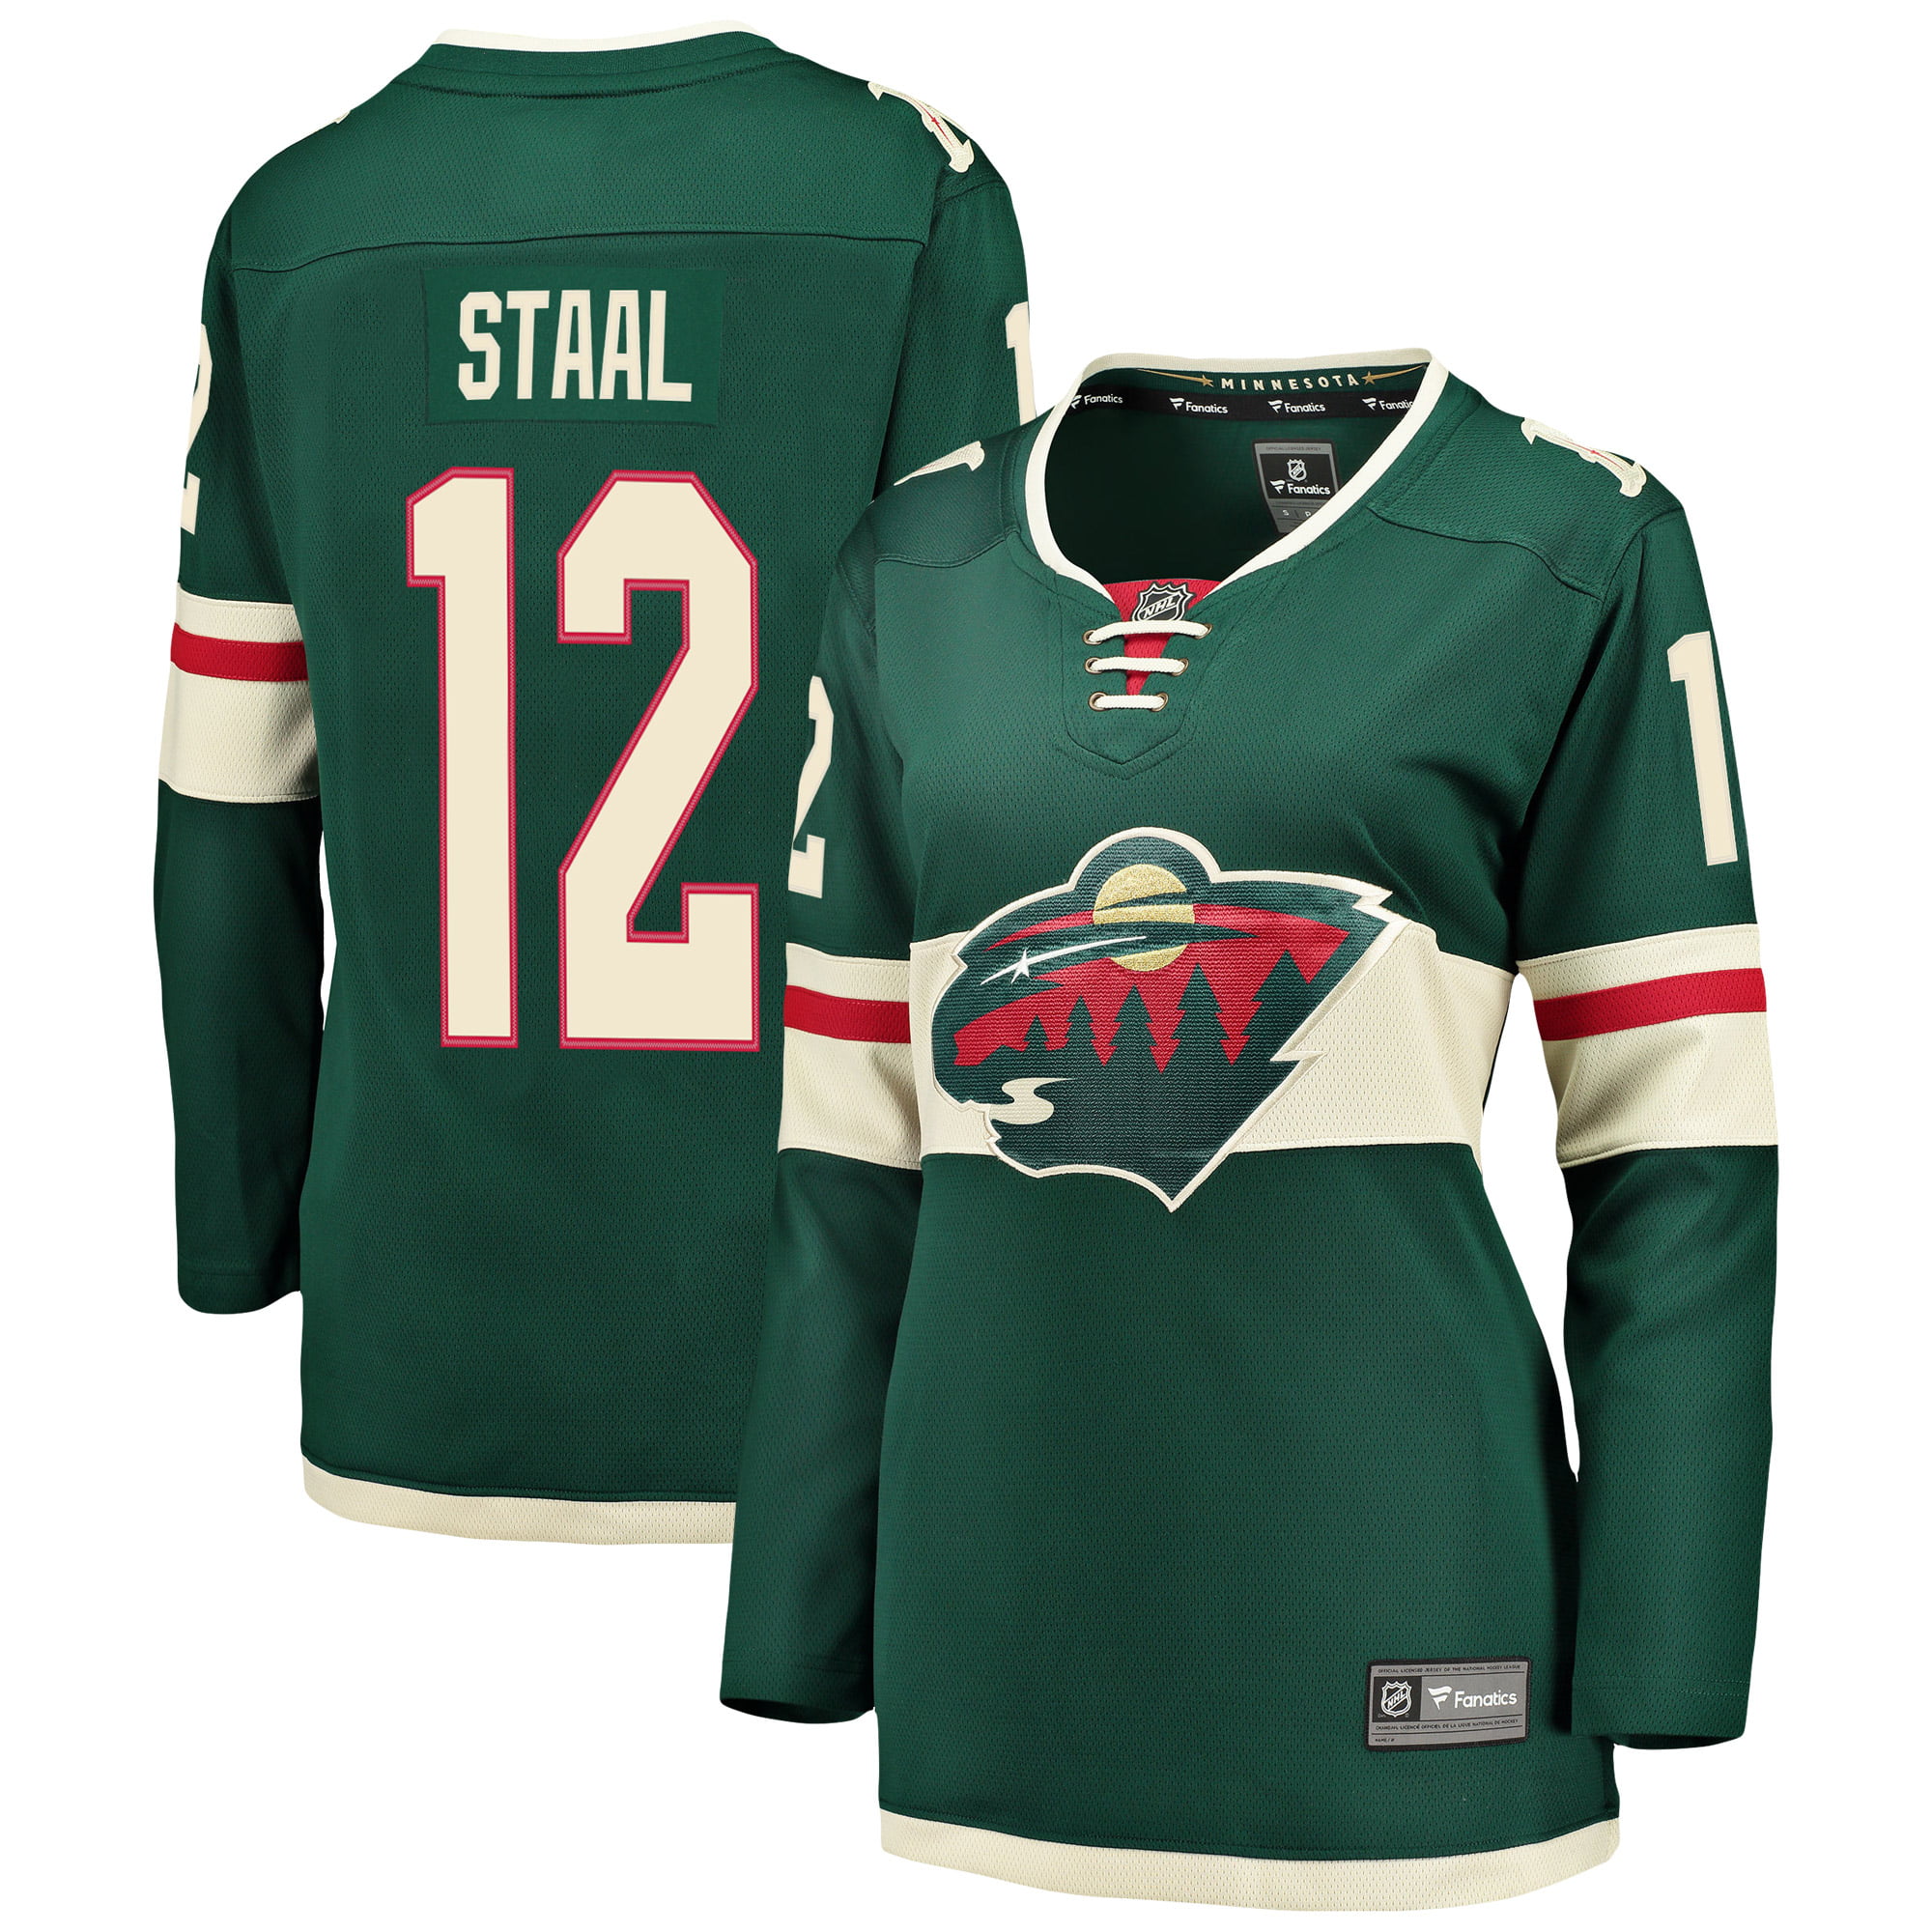 mn wild jerseys off our backs